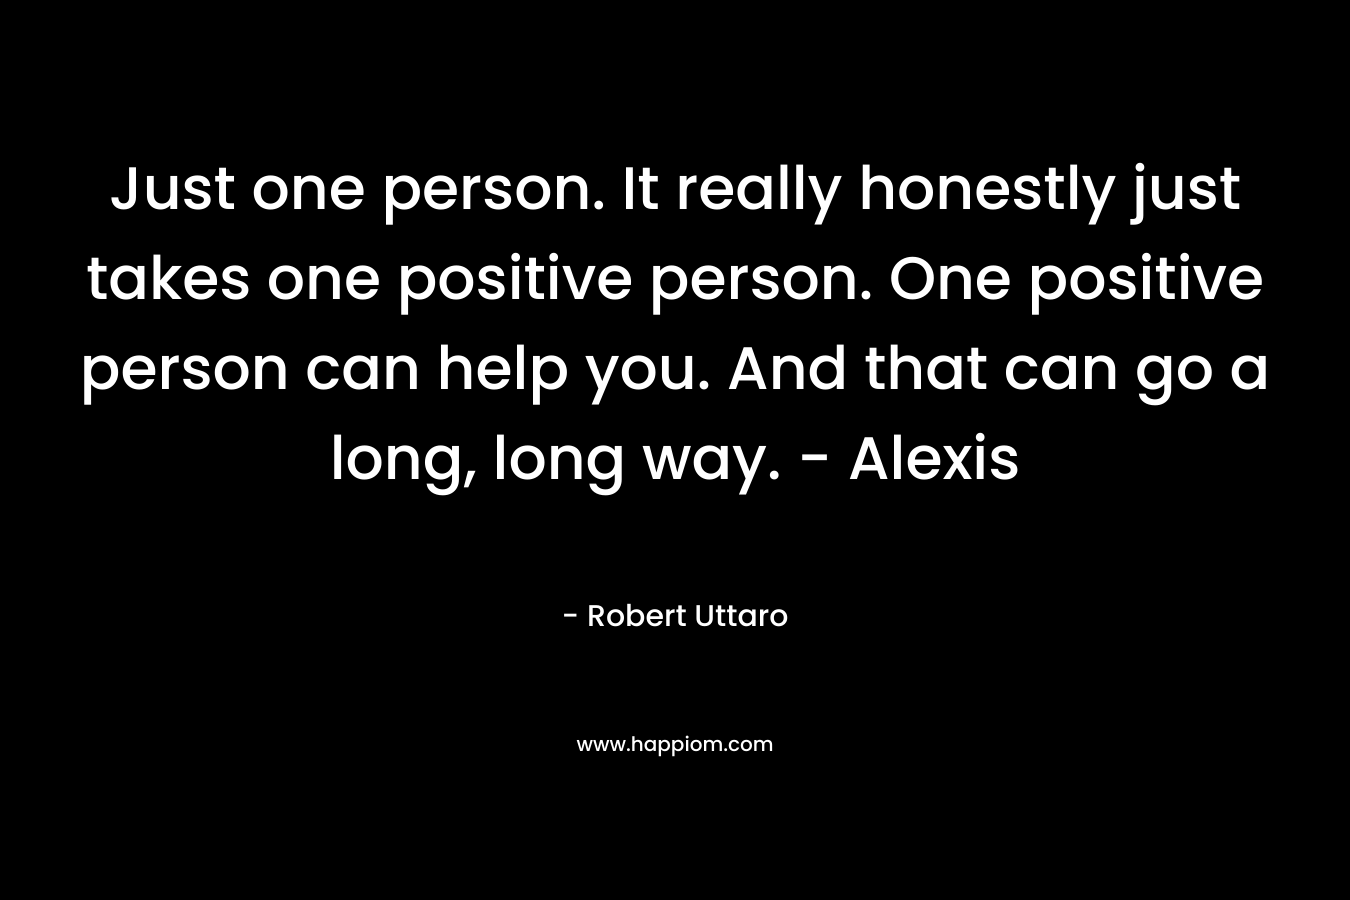 Just one person. It really honestly just takes one positive person. One positive person can help you. And that can go a long, long way. - Alexis